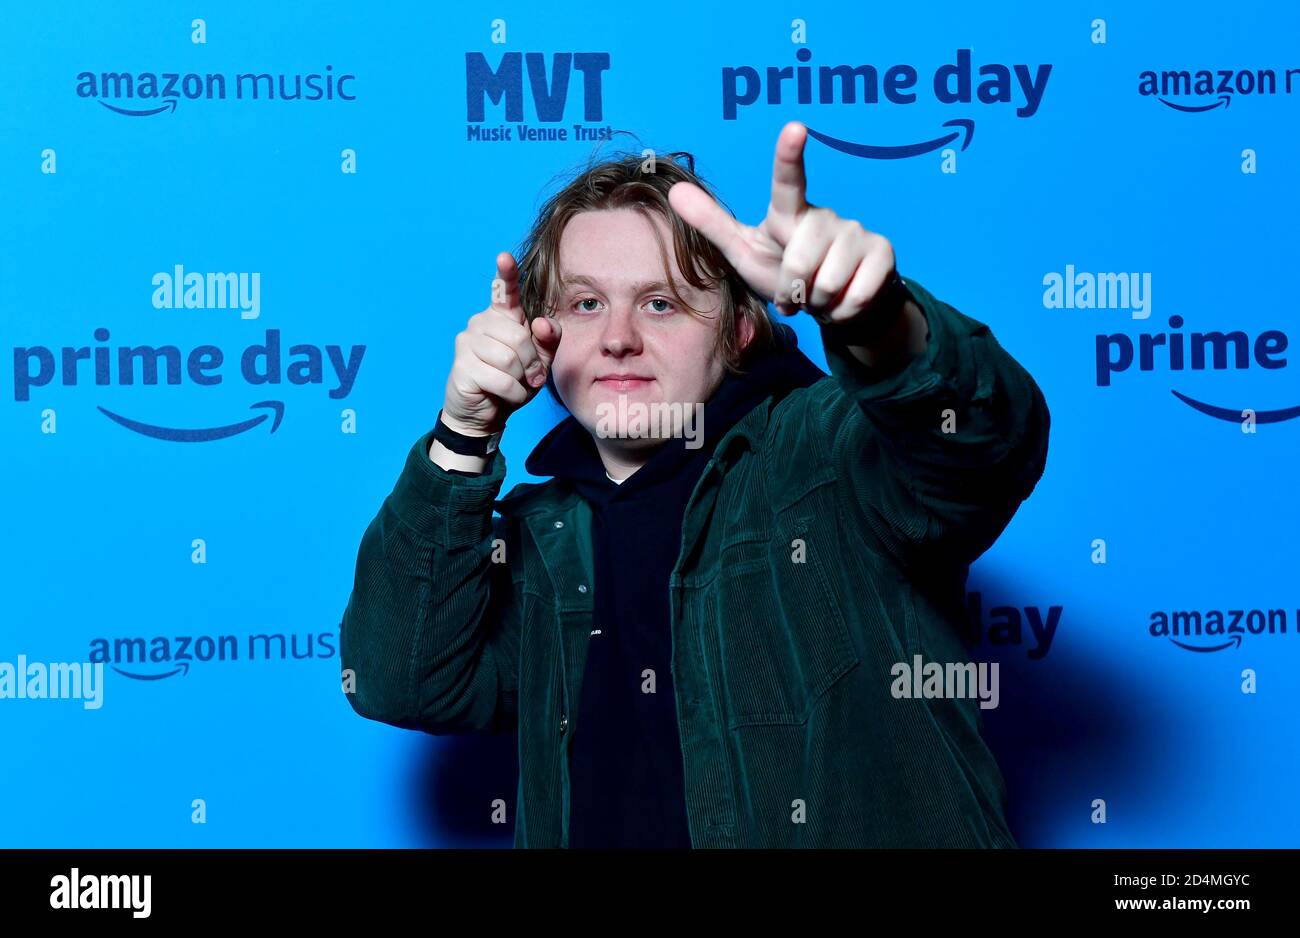 EDITORIAL USE ONLY Singer Lewis Capaldi performs at Sneaky Pete's in Edinburgh for Prime Day Live - a free, livestreamed event presented by Amazon Music, in support of Music Venue Trust to raise awareness and funds for UK music venues. Stock Photo